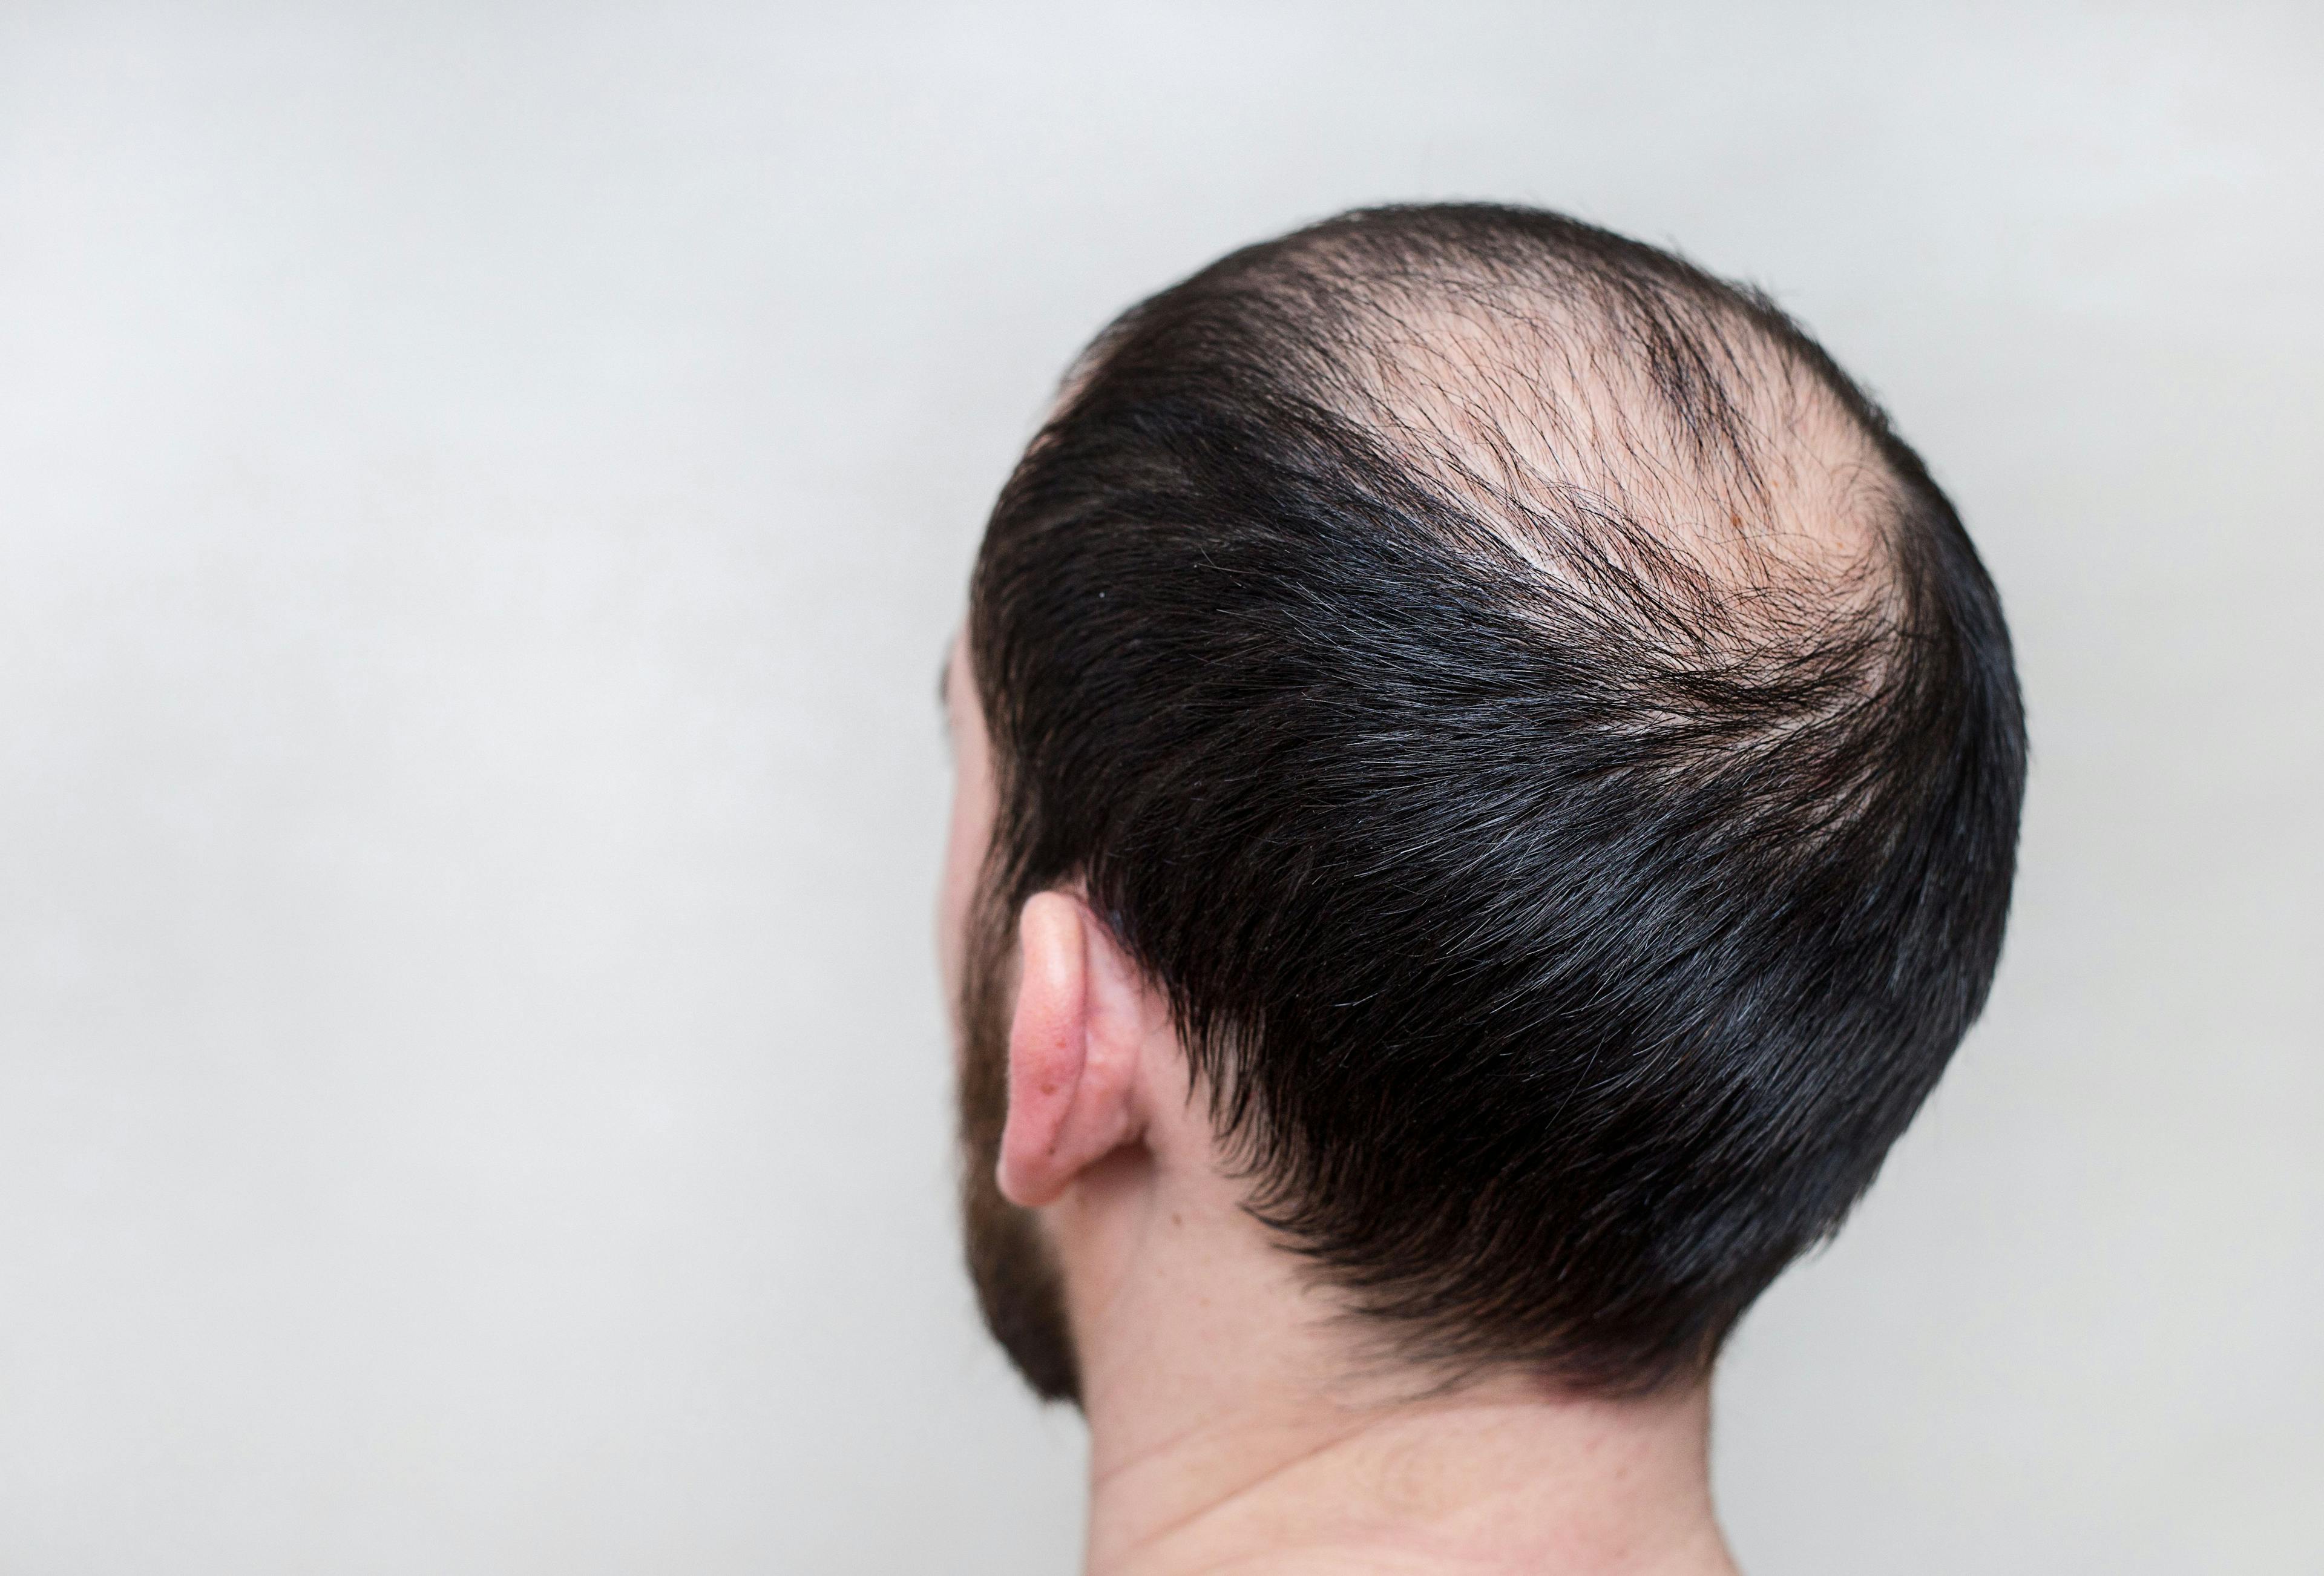 Ongoing Study Evaluates Combination Therapy for Androgenetic Alopecia